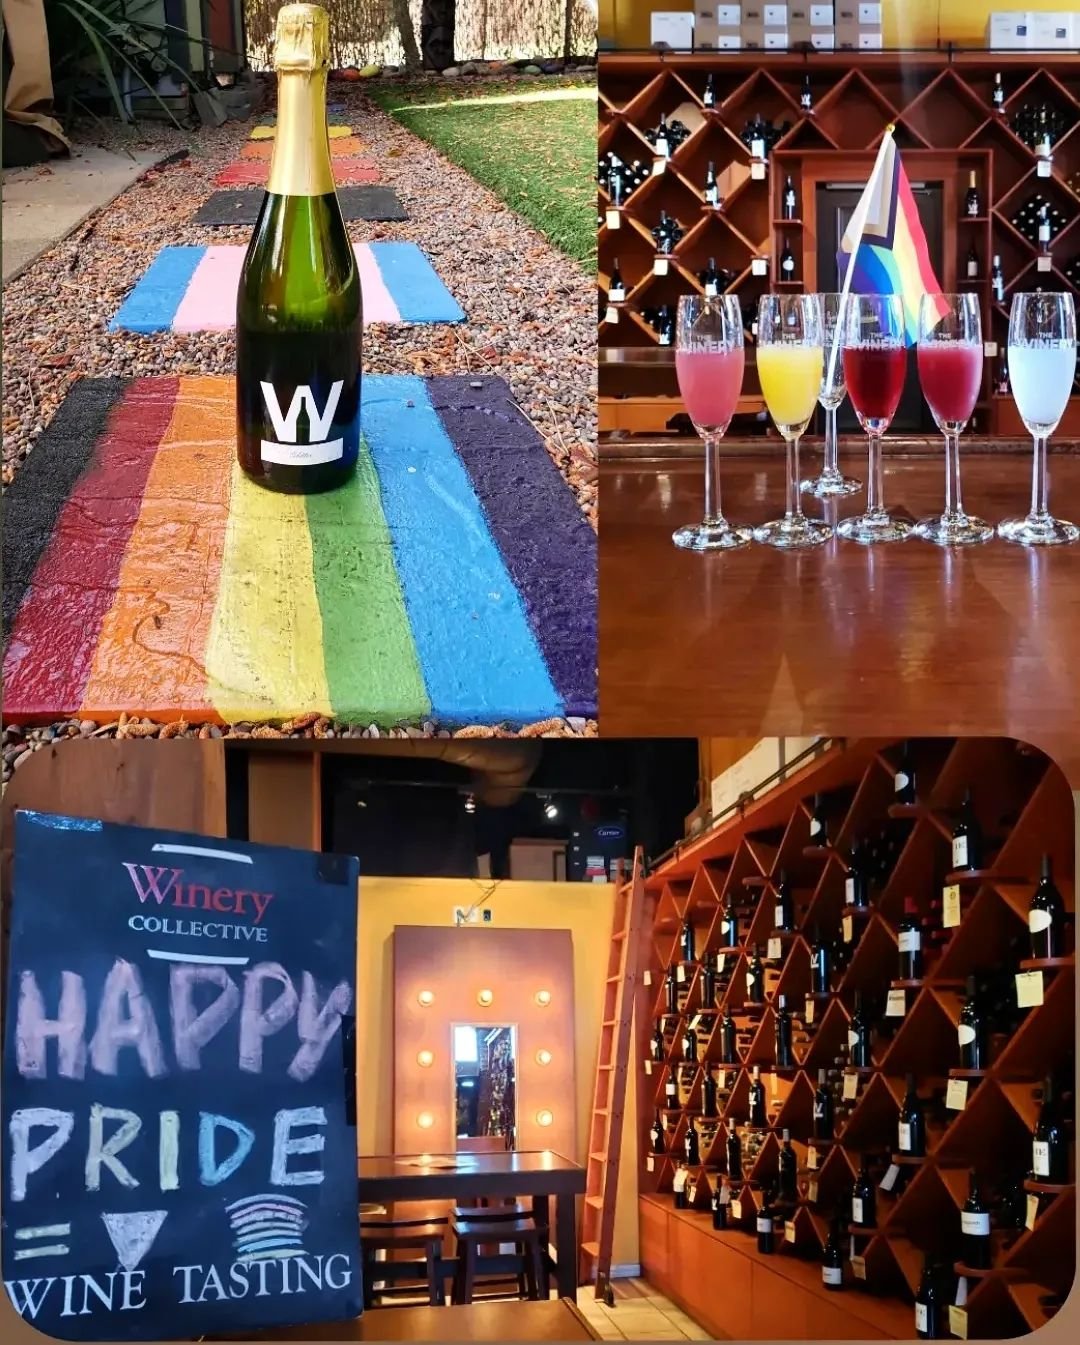 🌈 Happy Pride month from Winery Collective 🌈
And make sure you try our Pride mimosas flight made from our delicious Glitter sparkling wine. ✨ 🥂
Cheers to a great June ❤

#winerycollectivesf #fishermanswharf #sanfrancisco #lgbtq #pridemonth #pride2